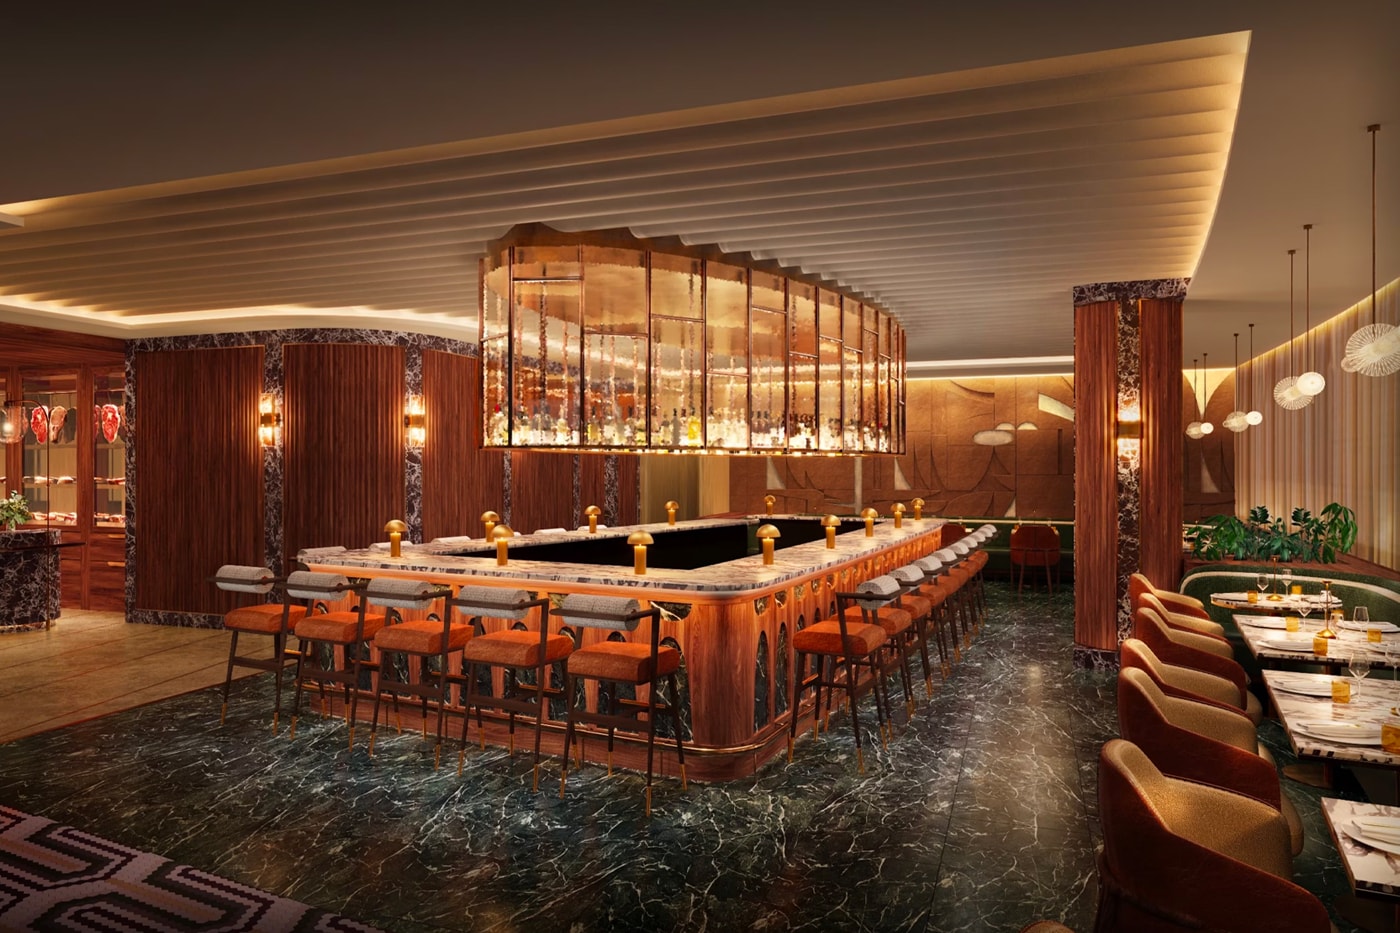 Travis Kelce and Patrick Mahomes To Open New Kansas City Steakhouse, 1587 Prime renderings football kansas city one of a kind dining experience nfl stars convergence of culinary artistry, athletic prowess, community enrichment